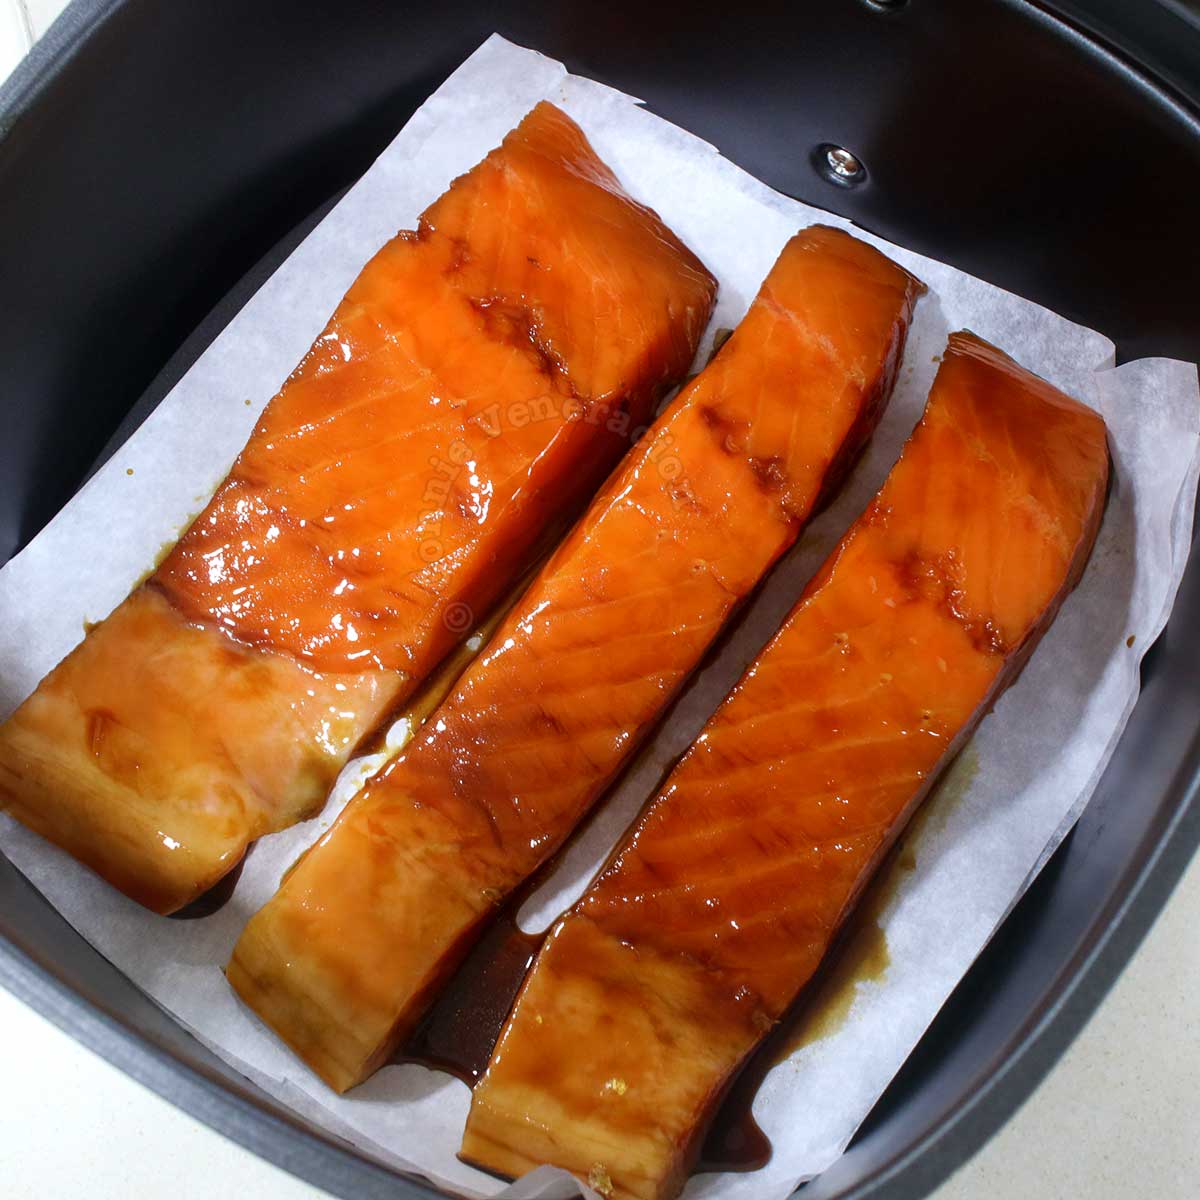 Arranging marinated salmon fillets in air fryer basket lined with parchment paper